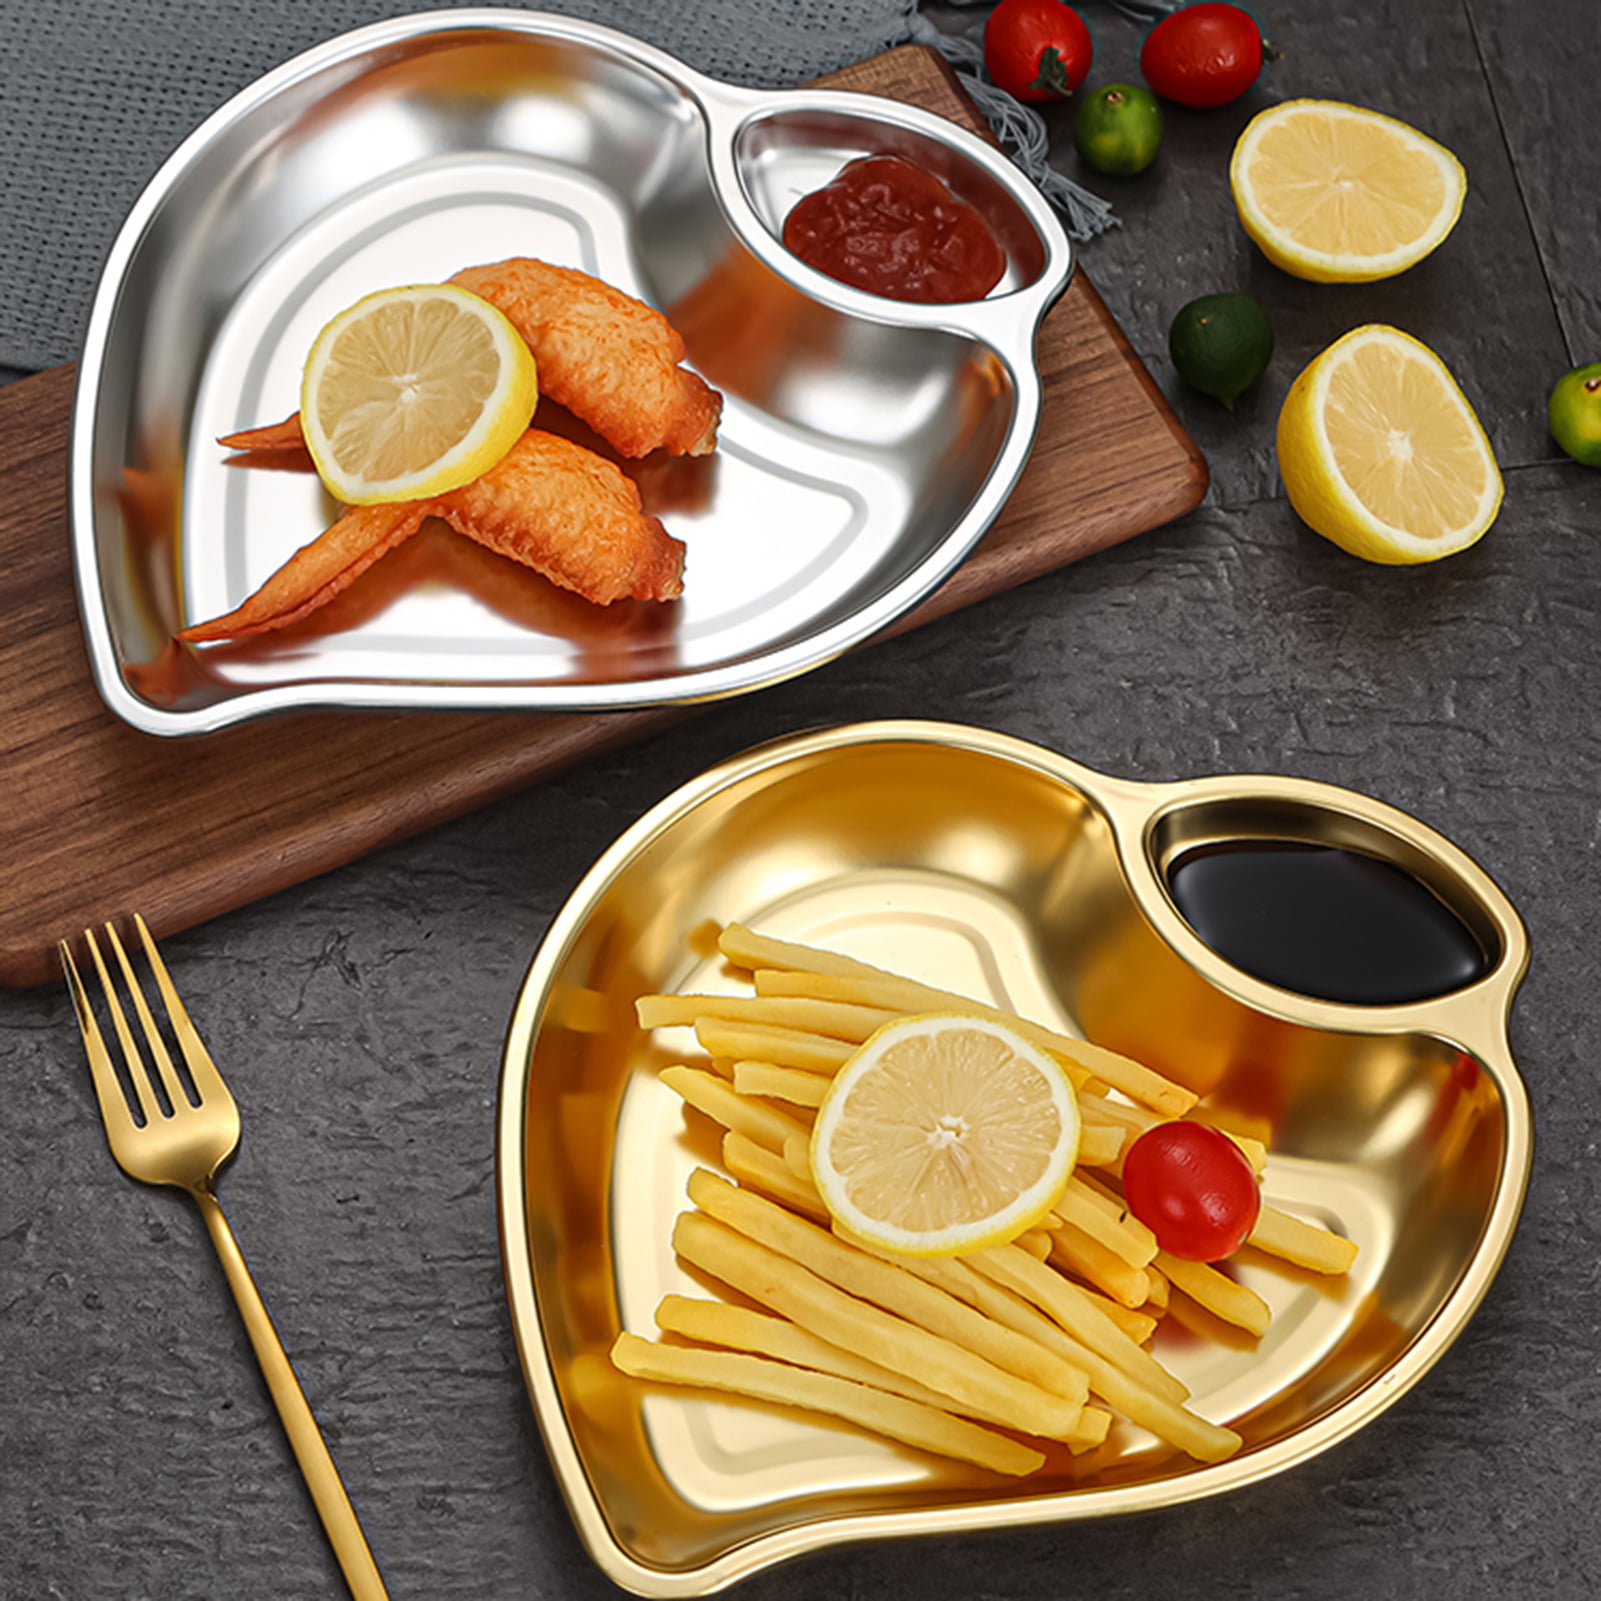 Details about   Appetizer Serving Dish Glass with Ramekin Insert and Silver Plated Fork 